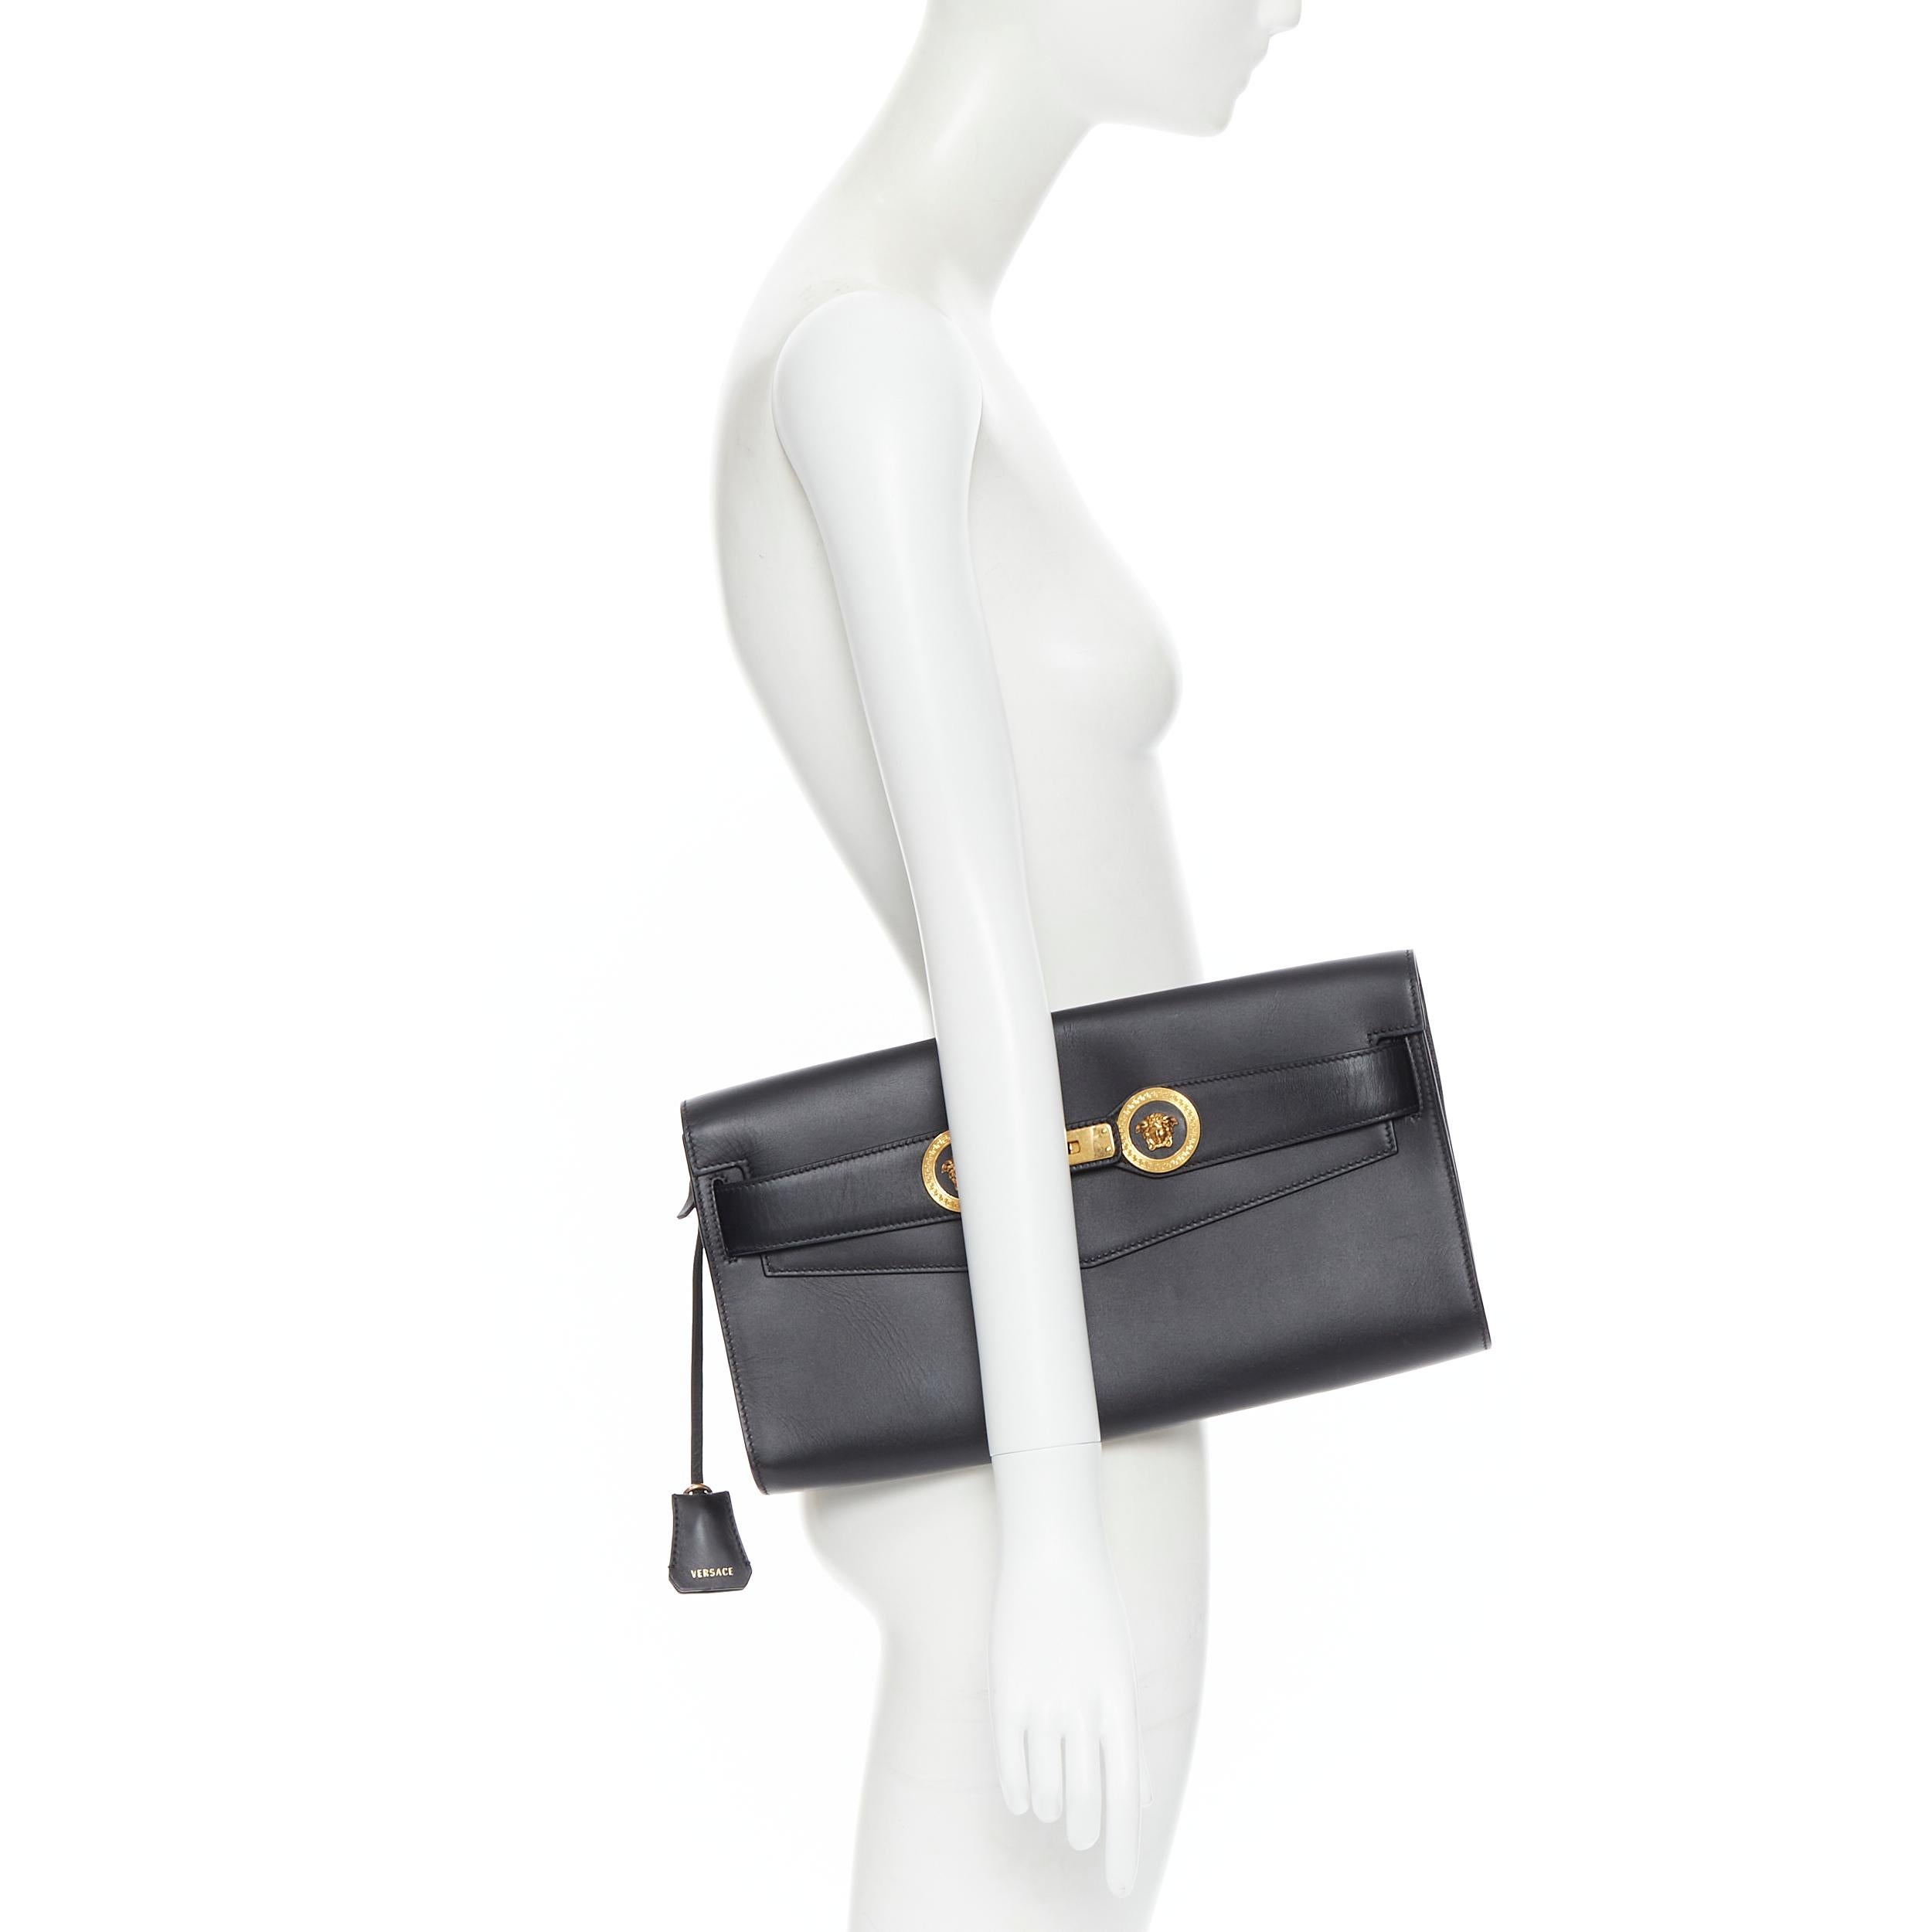 VERSACE 2018 Tribute Icon black gold Double Medusa coin Kelly clutch bag 
Reference: TGAS/B00588 
Brand: Versace 
Designer: Donatella Versace 
Model: Tribute Icon 
Material: Leather 
Color: Black 
Closure: Turnlock 
Extra Detail: Double Medusa Coin.